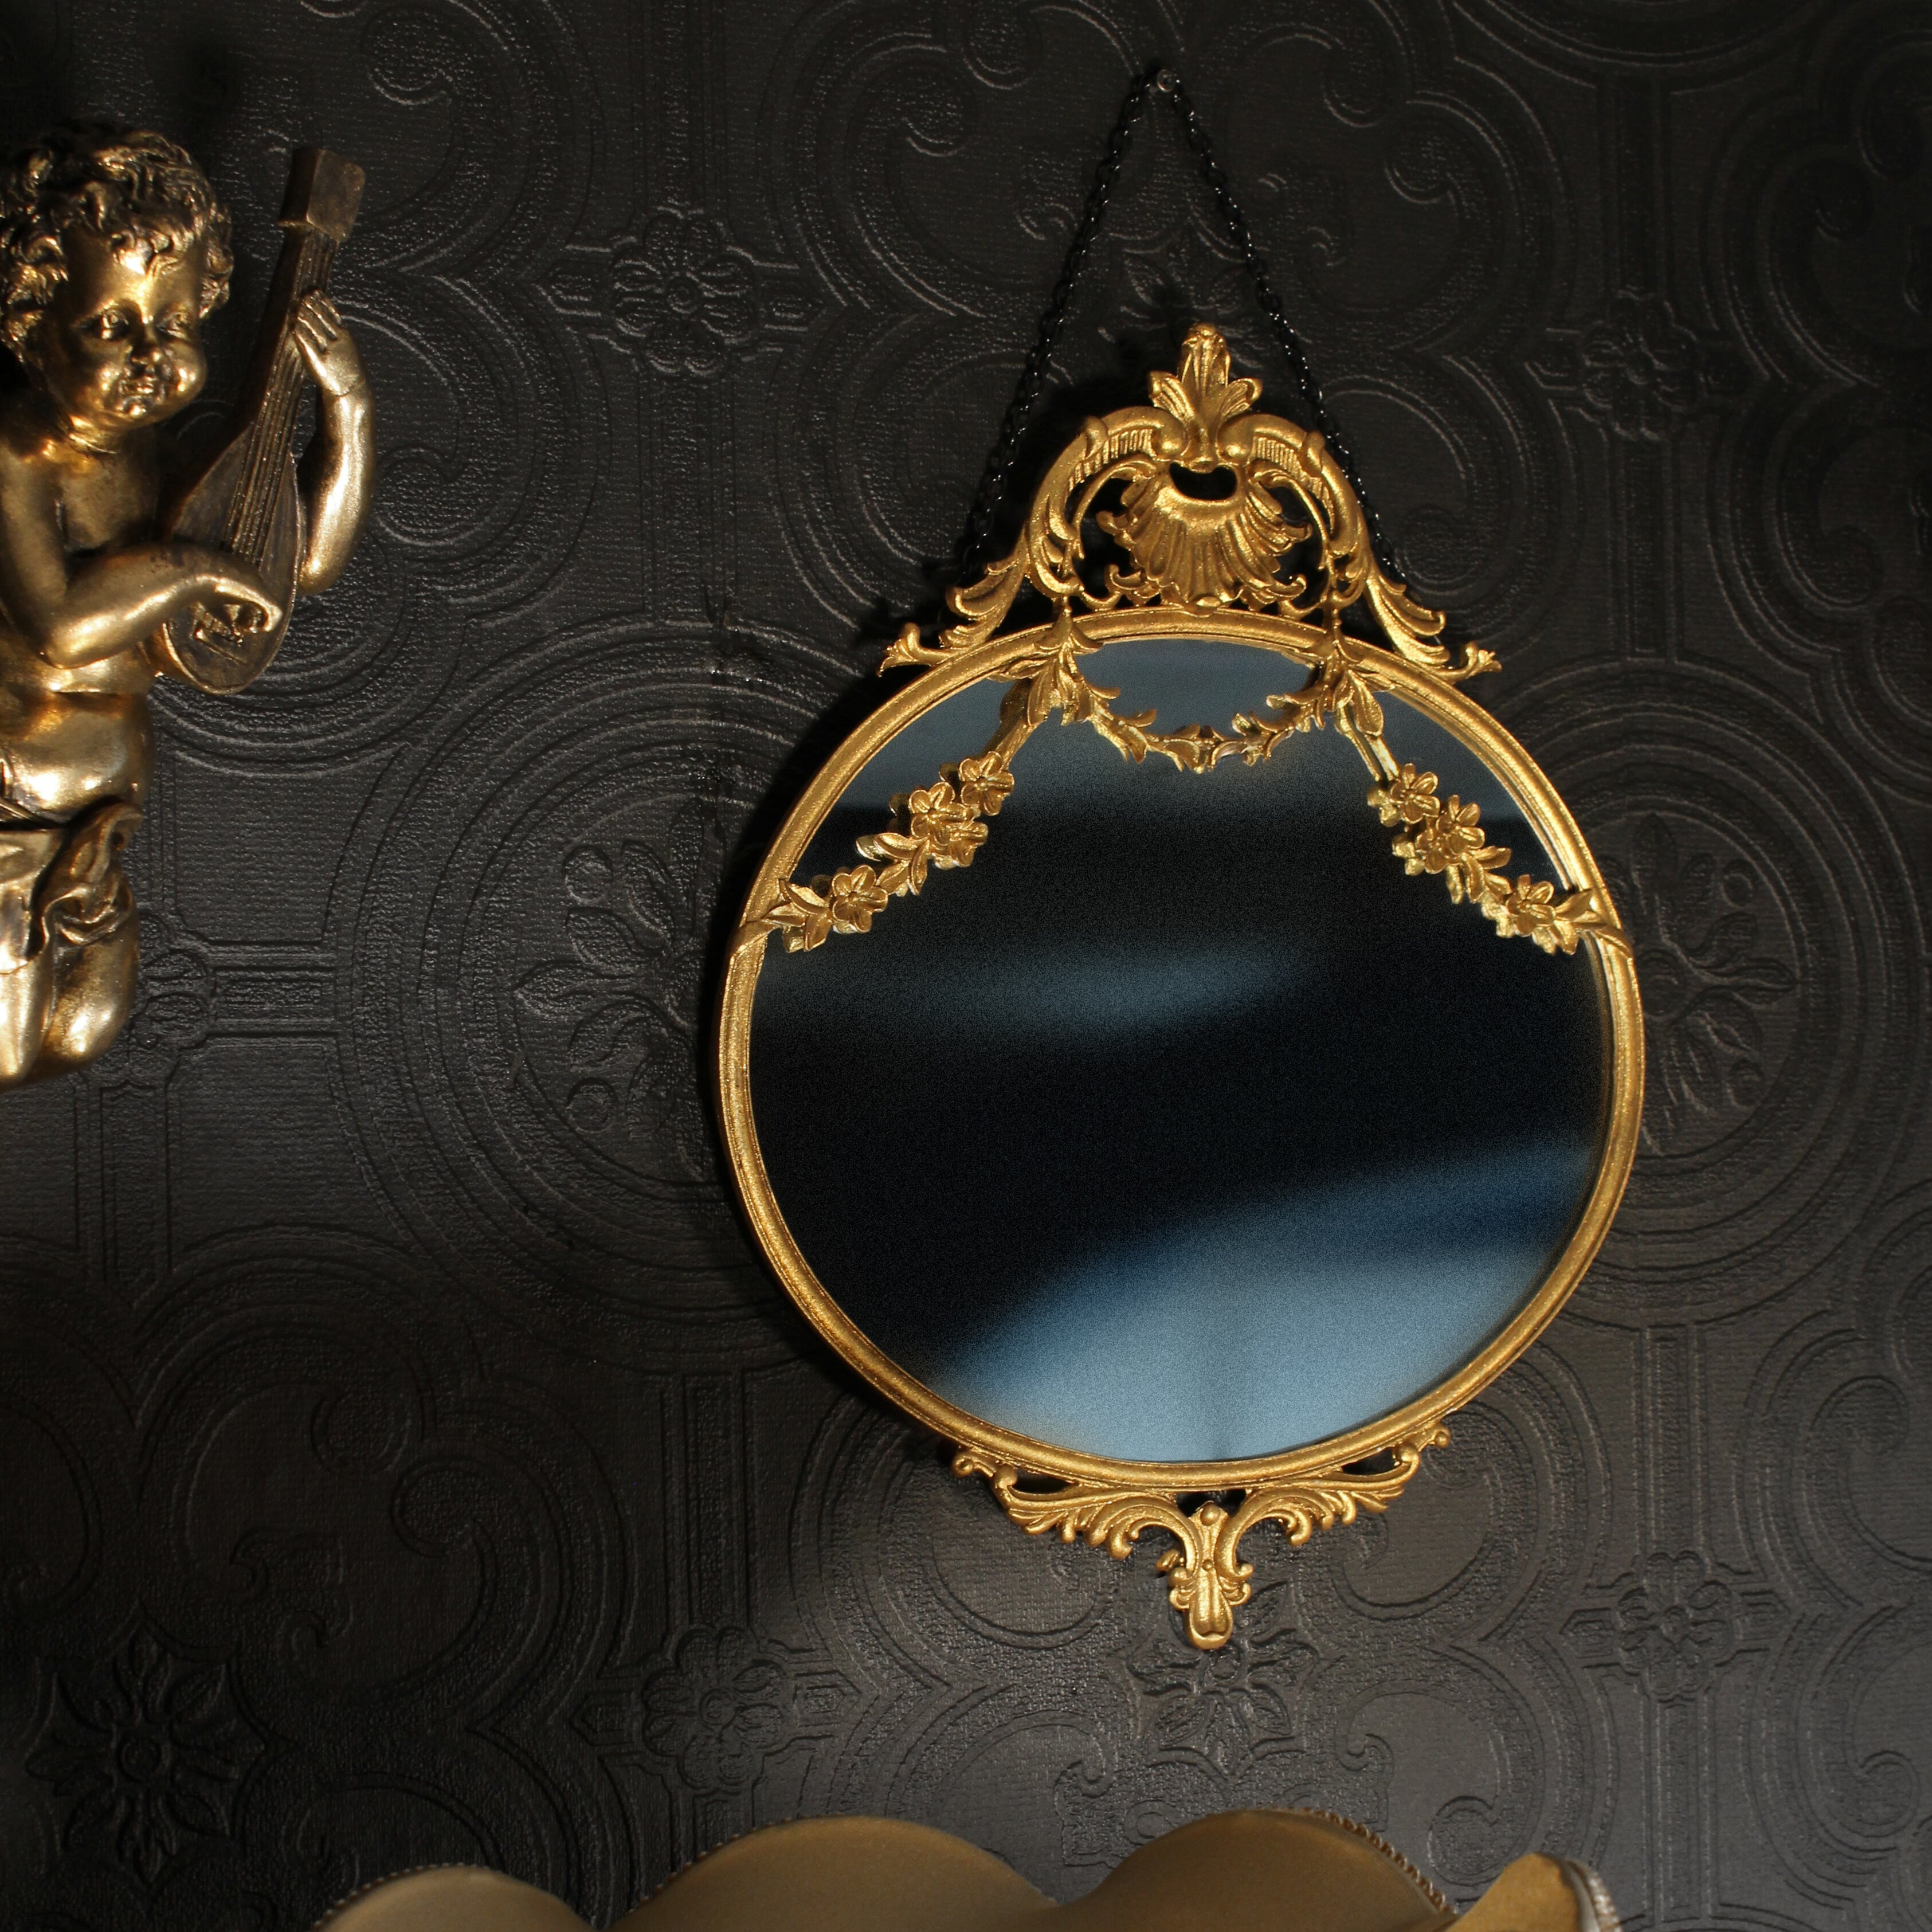 Gold oval baroque ornate mirror by The Blackened Teeth - The Blackened Abode